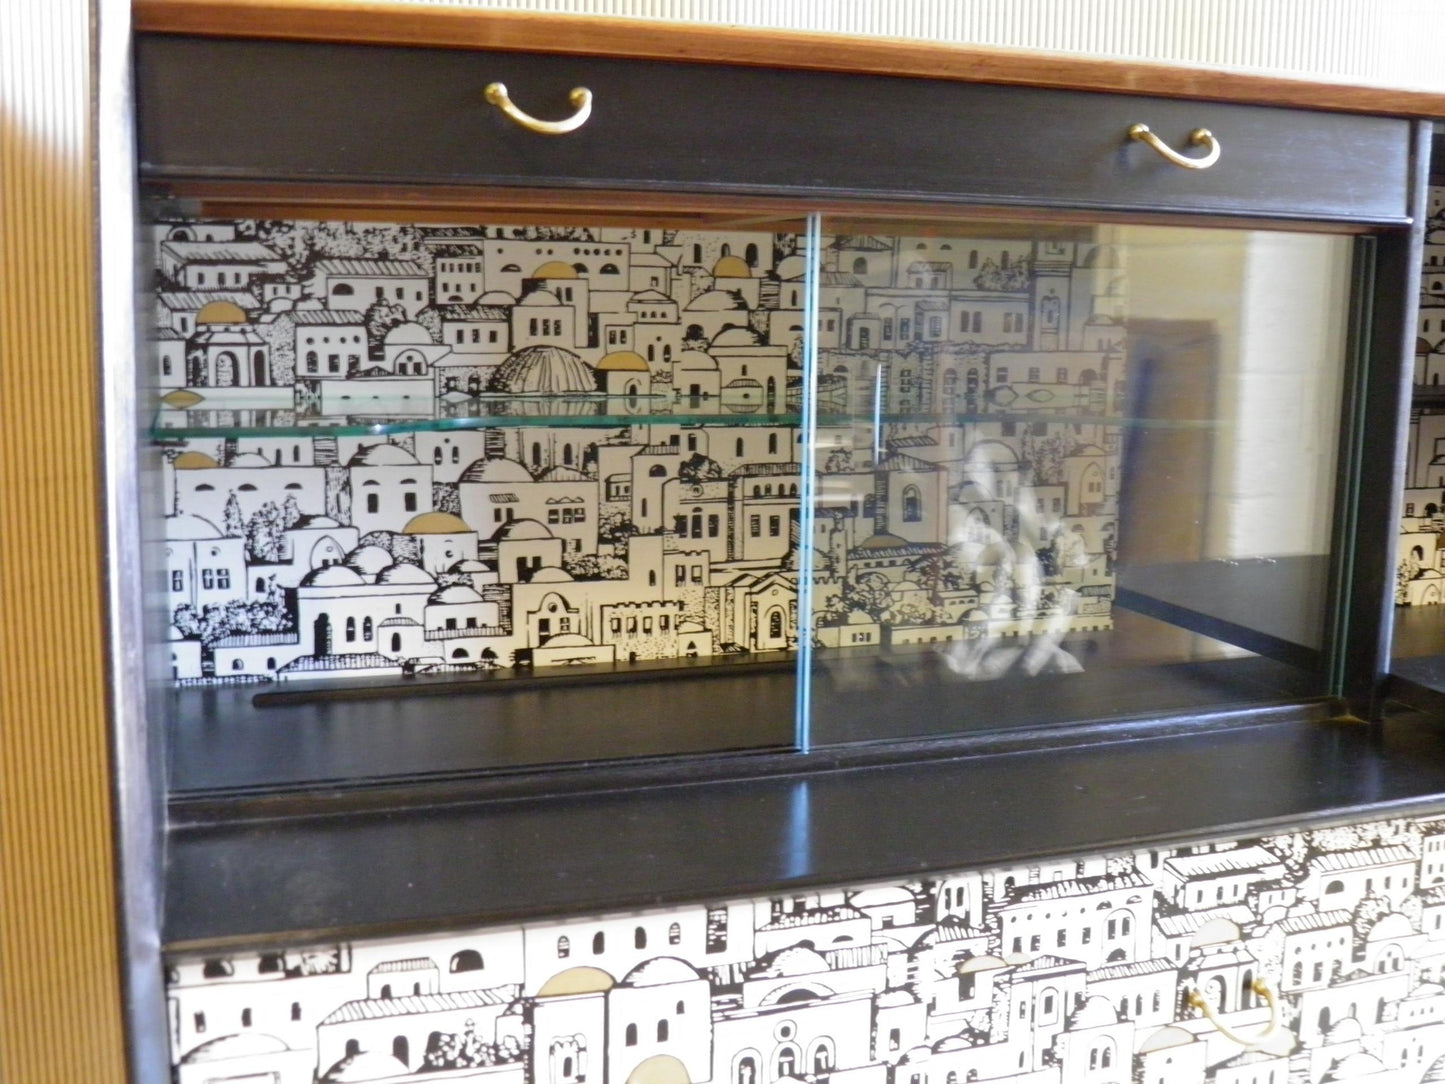 Superb Fornasetti Style G Plan Sideboard